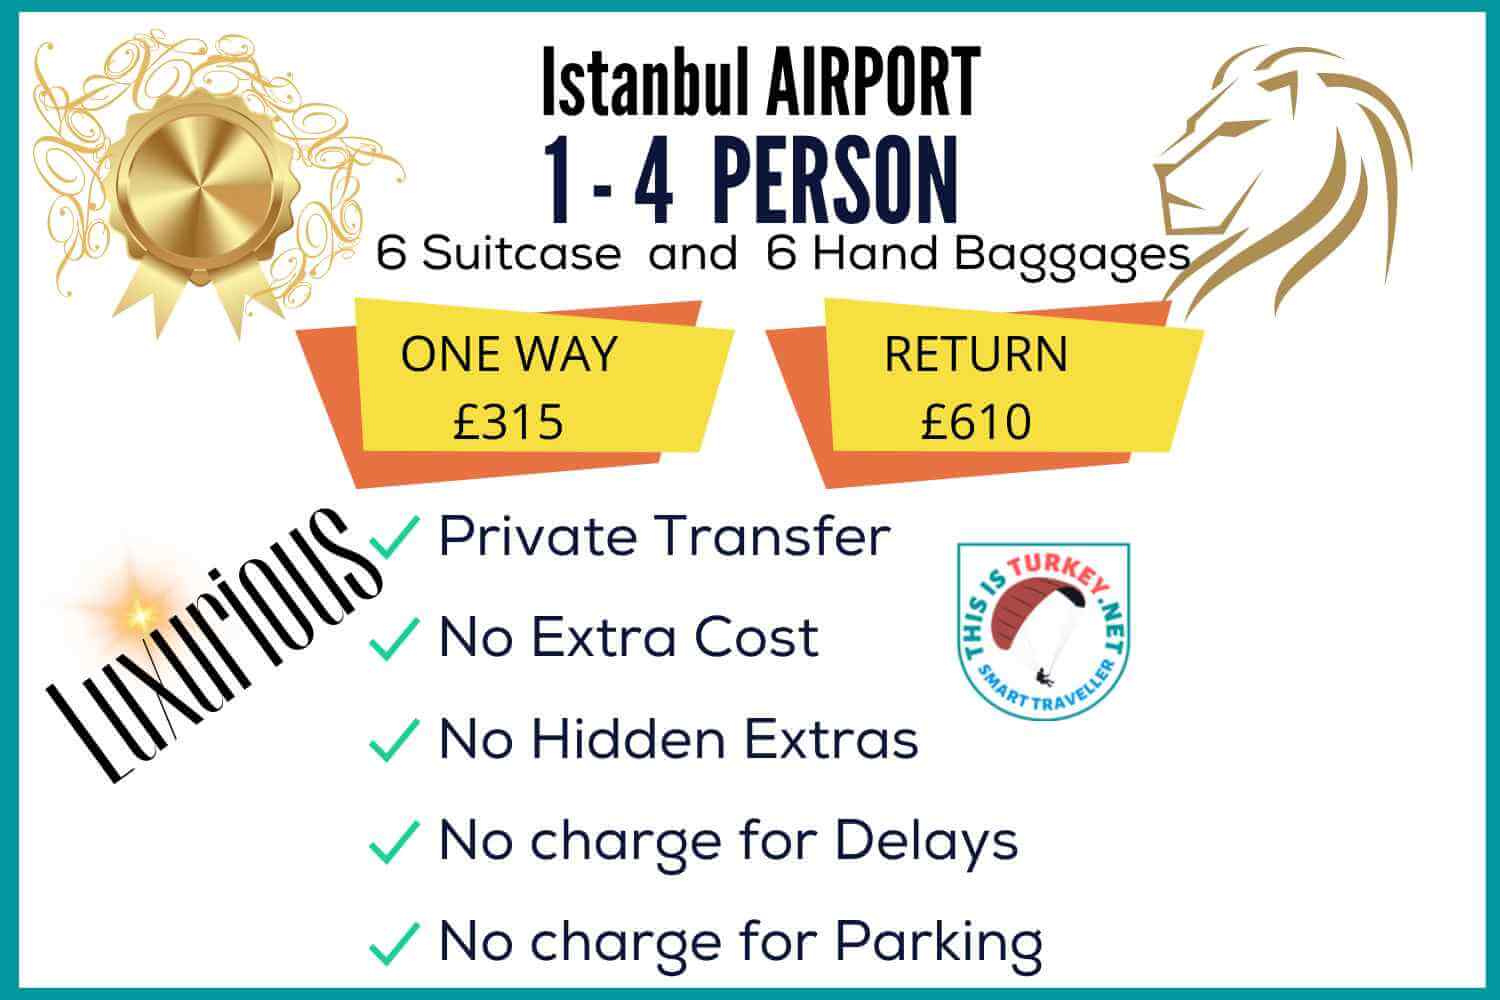 Luxurious Private Transfer service to Hotels in any ware from Istanbul Airport comes with no extra cost and hidden extras. All our Airport Transfer vehicles are comfortable and Airconditioned, and drivers are experienced locals.